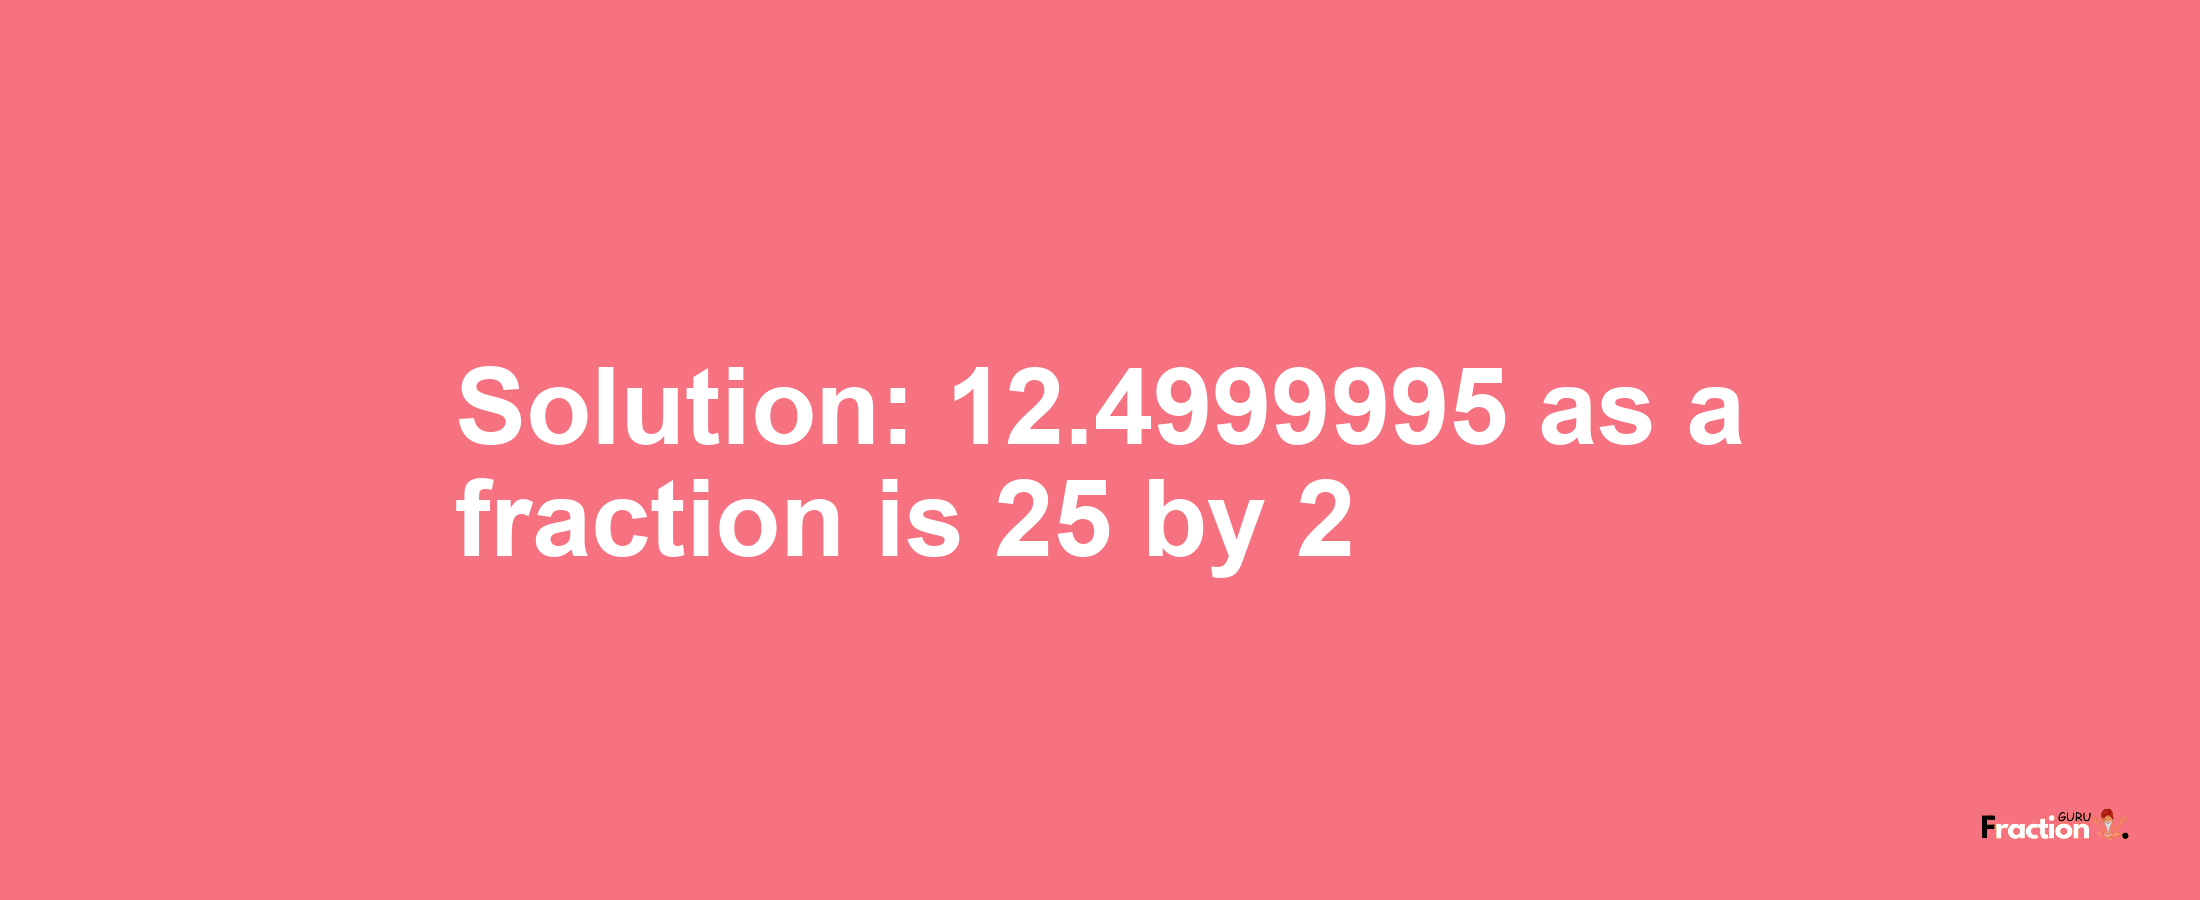 Solution:12.4999995 as a fraction is 25/2